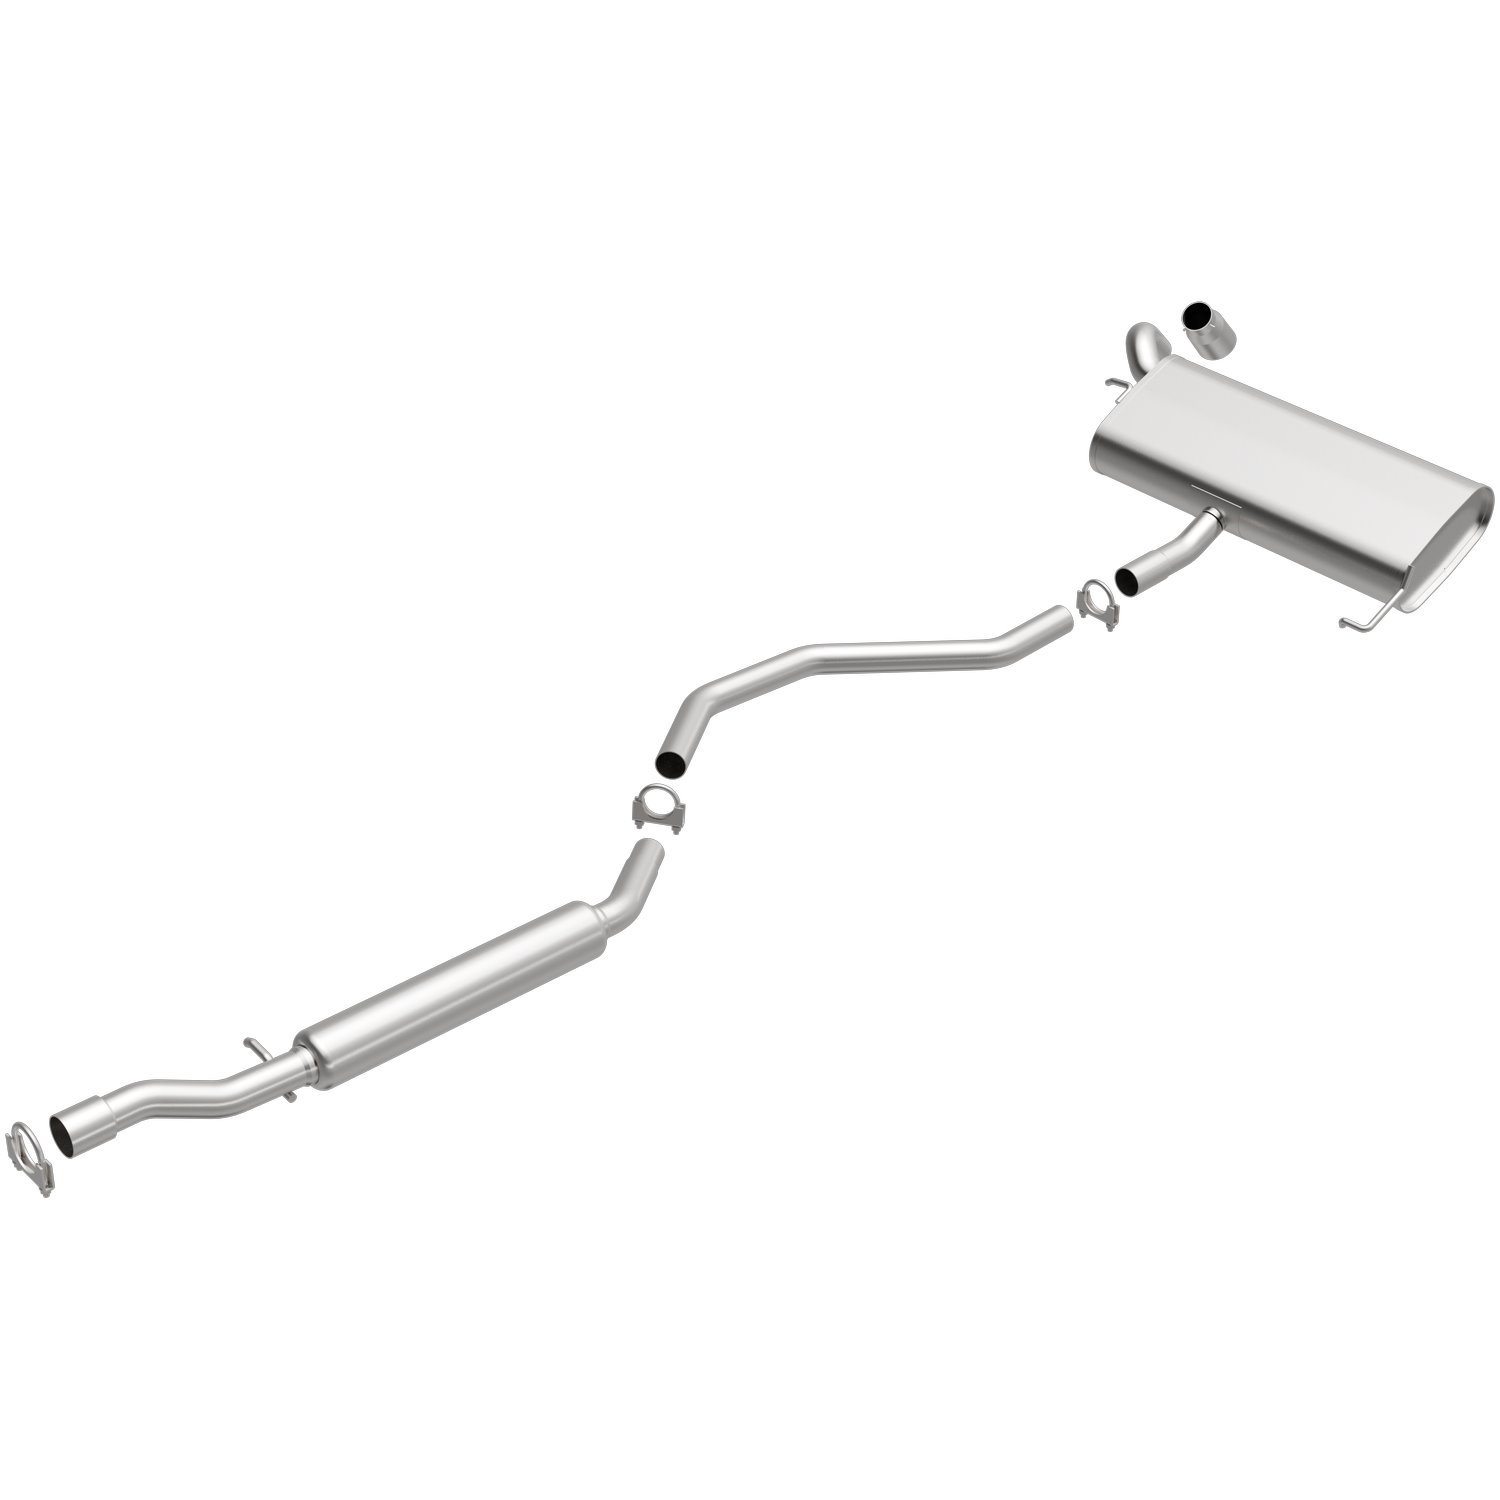 Direct-Fit Exhaust Kit, 2007-2012 Dodge Caliber, Jeep